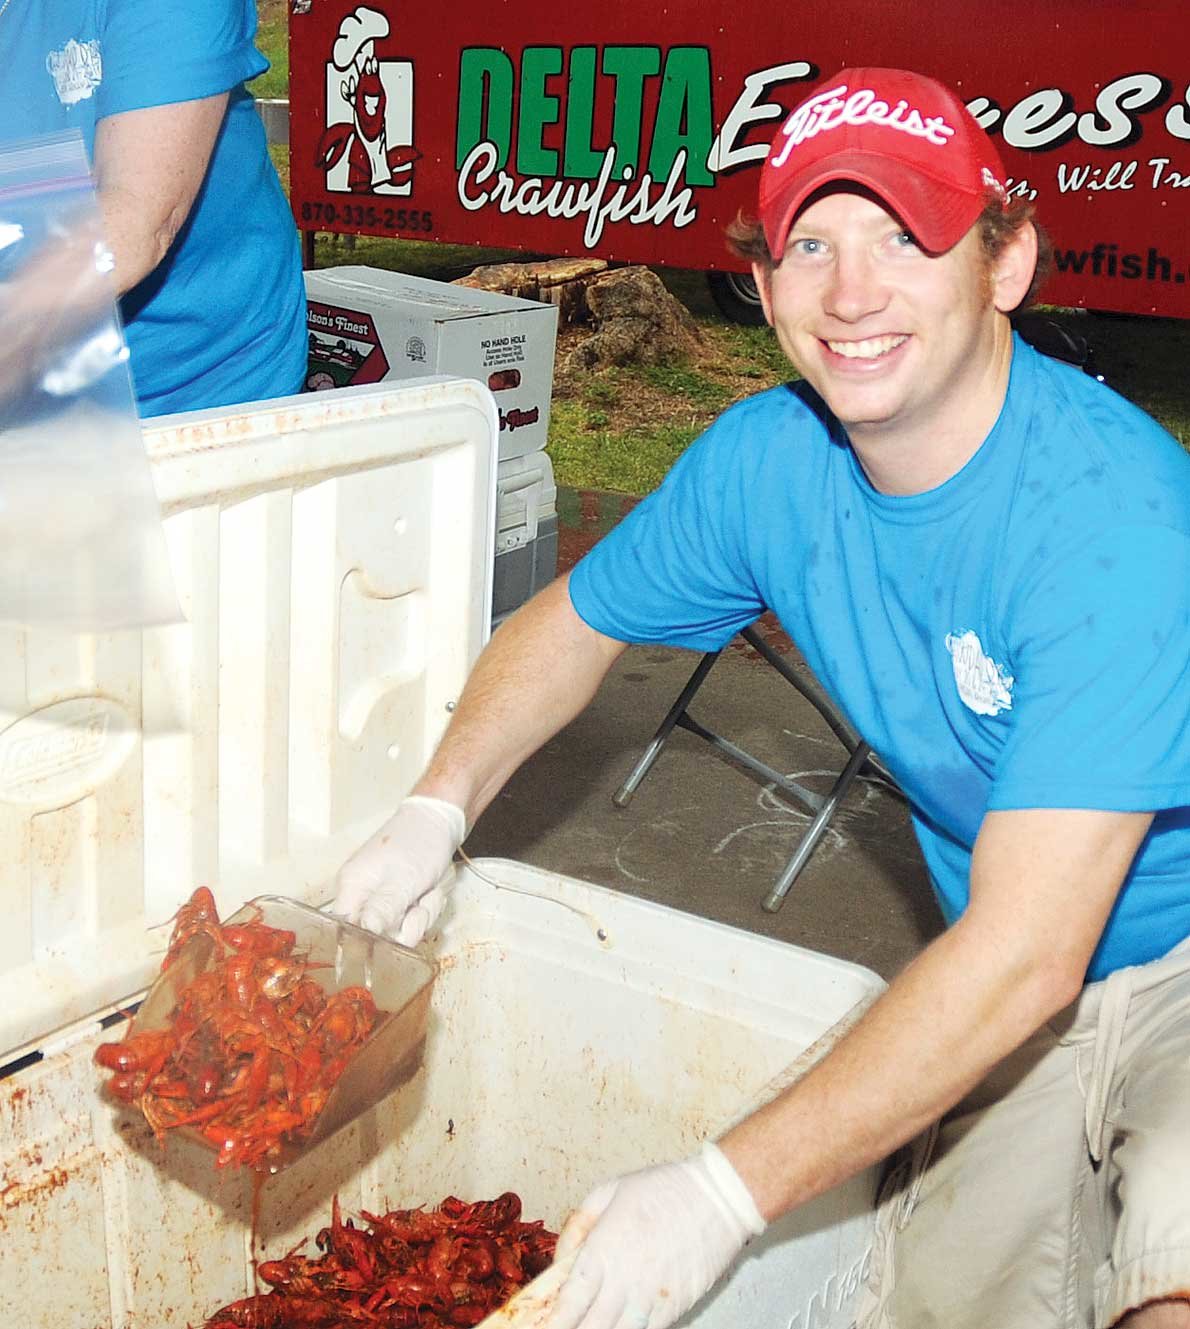 What’s going on today at Crawdad Days? Harrison Daily